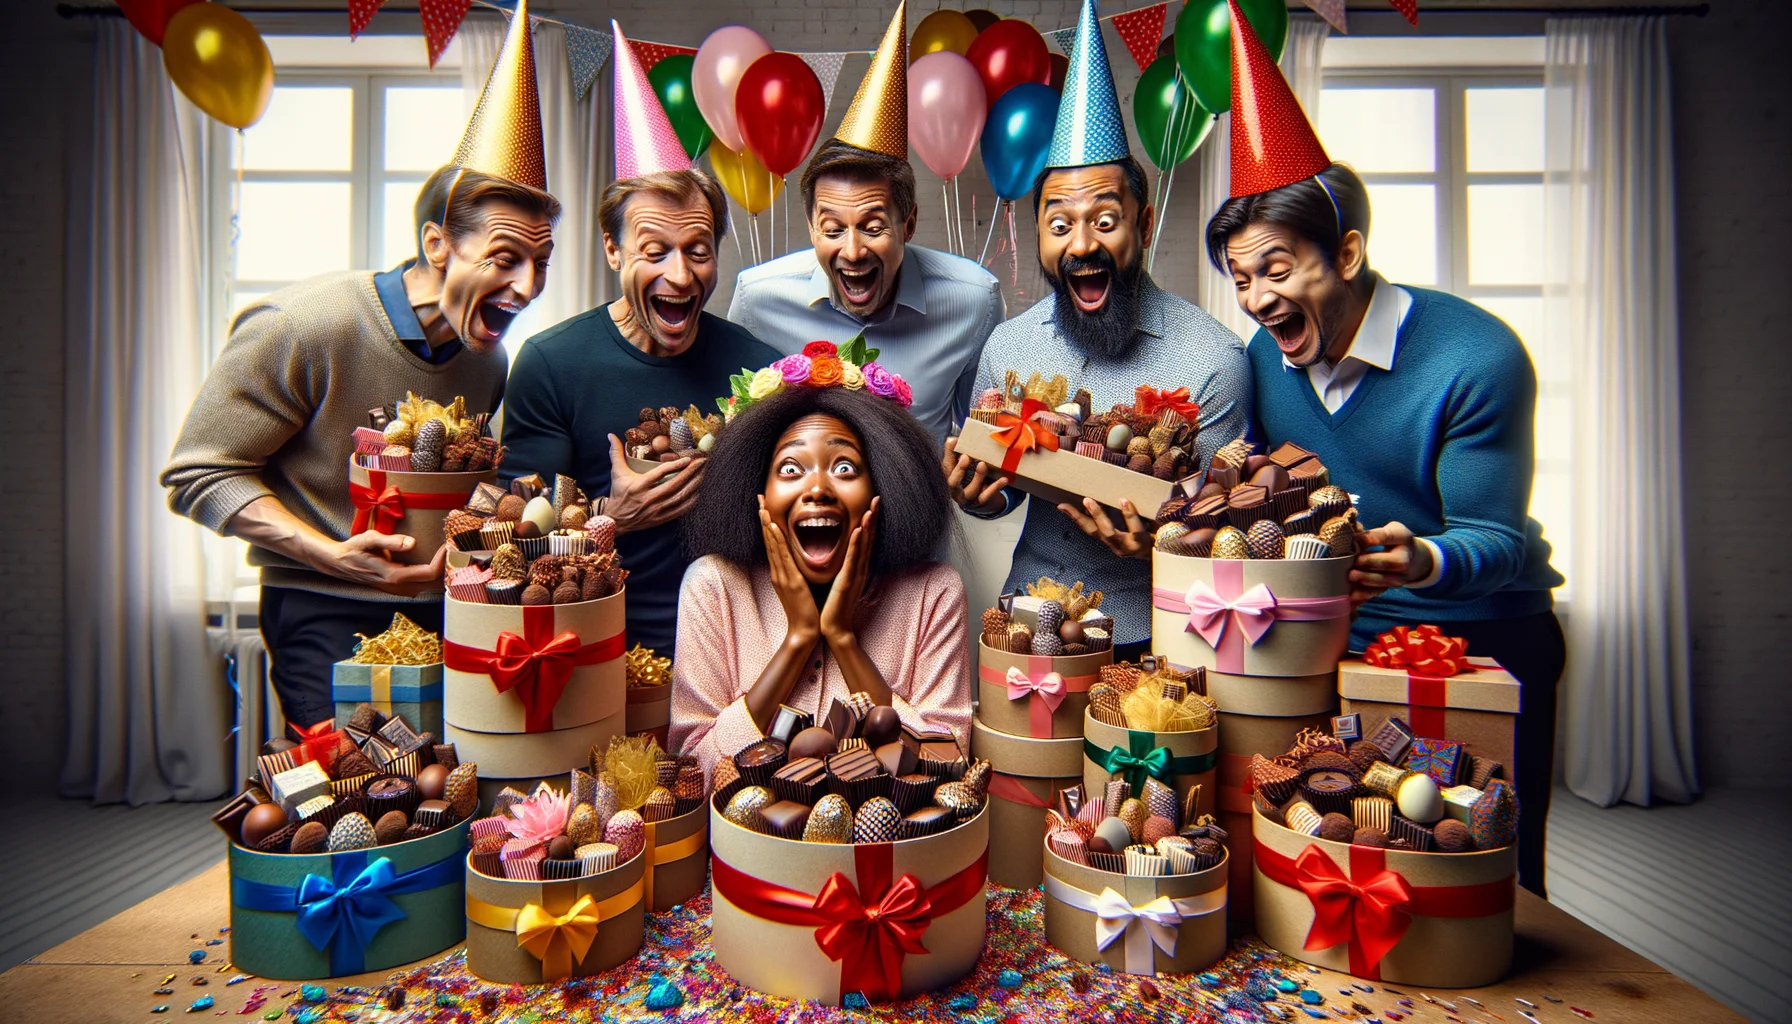 Imagine a humorous and realistic scenario where five people are surprising a friend with an enormous collection of 'Order Chocolate Gift Baskets'. Each person is different in terms of gender and descent: one is a Caucasian male, another a Hispanic female, a Middle-Eastern male, a South Asian female, and a Black male. They are all grinning widely and wearing an assortment of colorful party hats. Their friend, an African female with a look of complete shock, is surrounded by an assortment of beautifully wrapped chocolate gift baskets piled high in varied designs. The setting is a bright, cheerful room decorated with balloons and streamers.